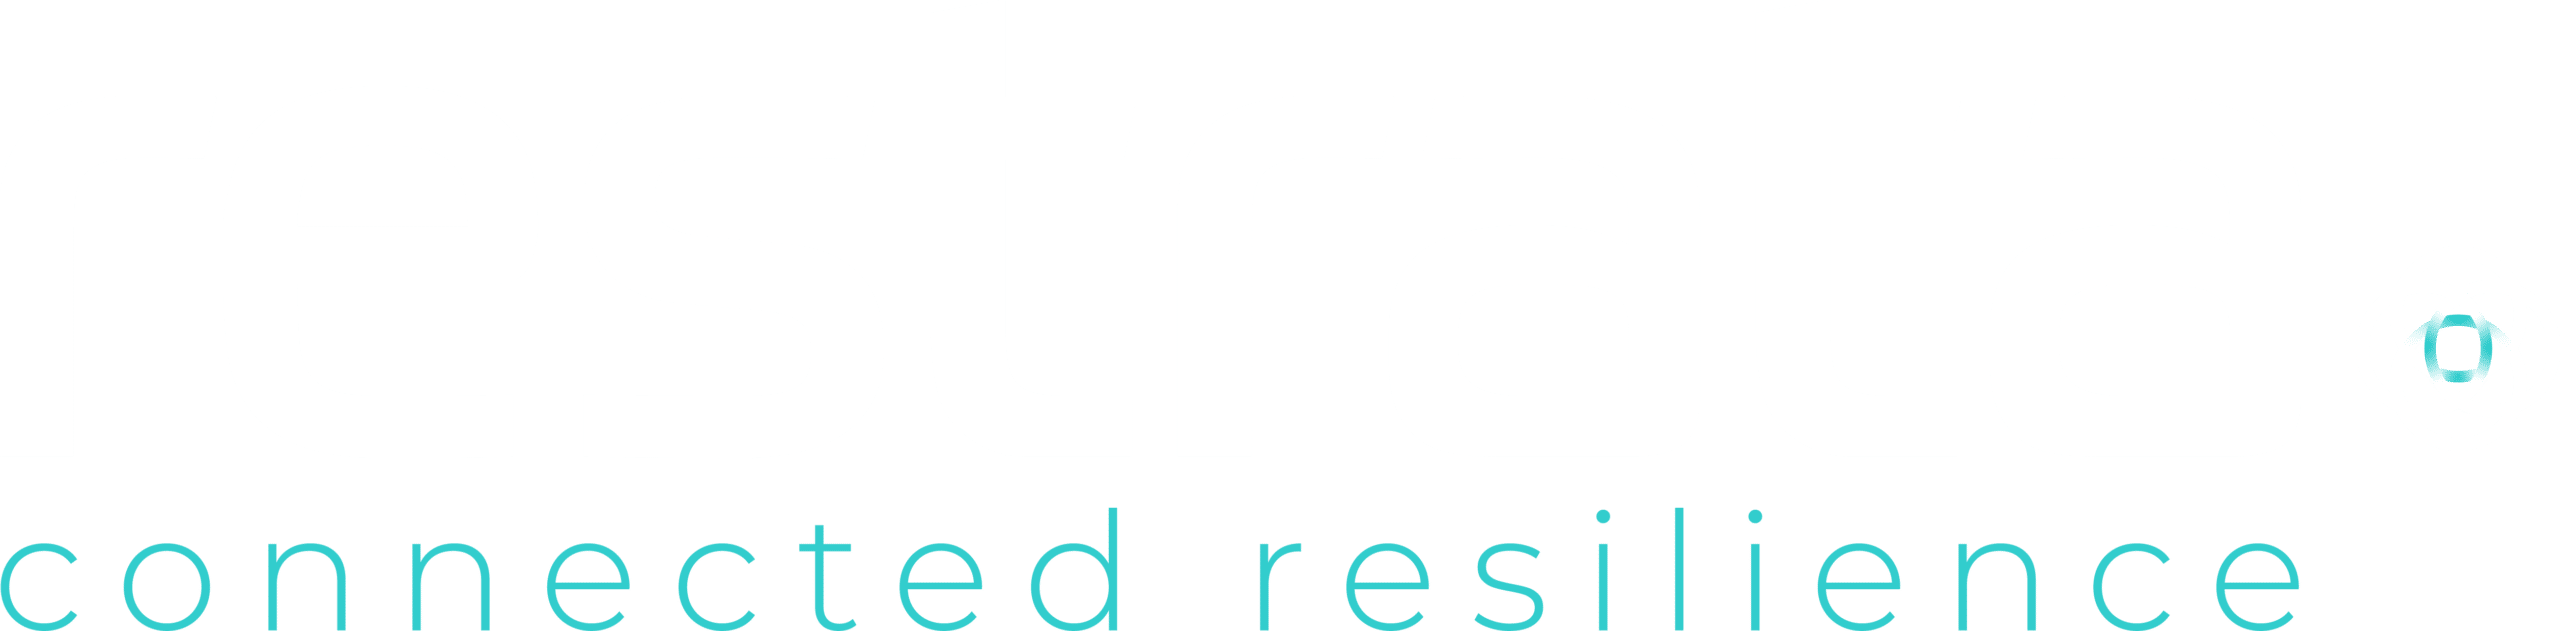 Restrata-Connected-Resilience-logo-Light